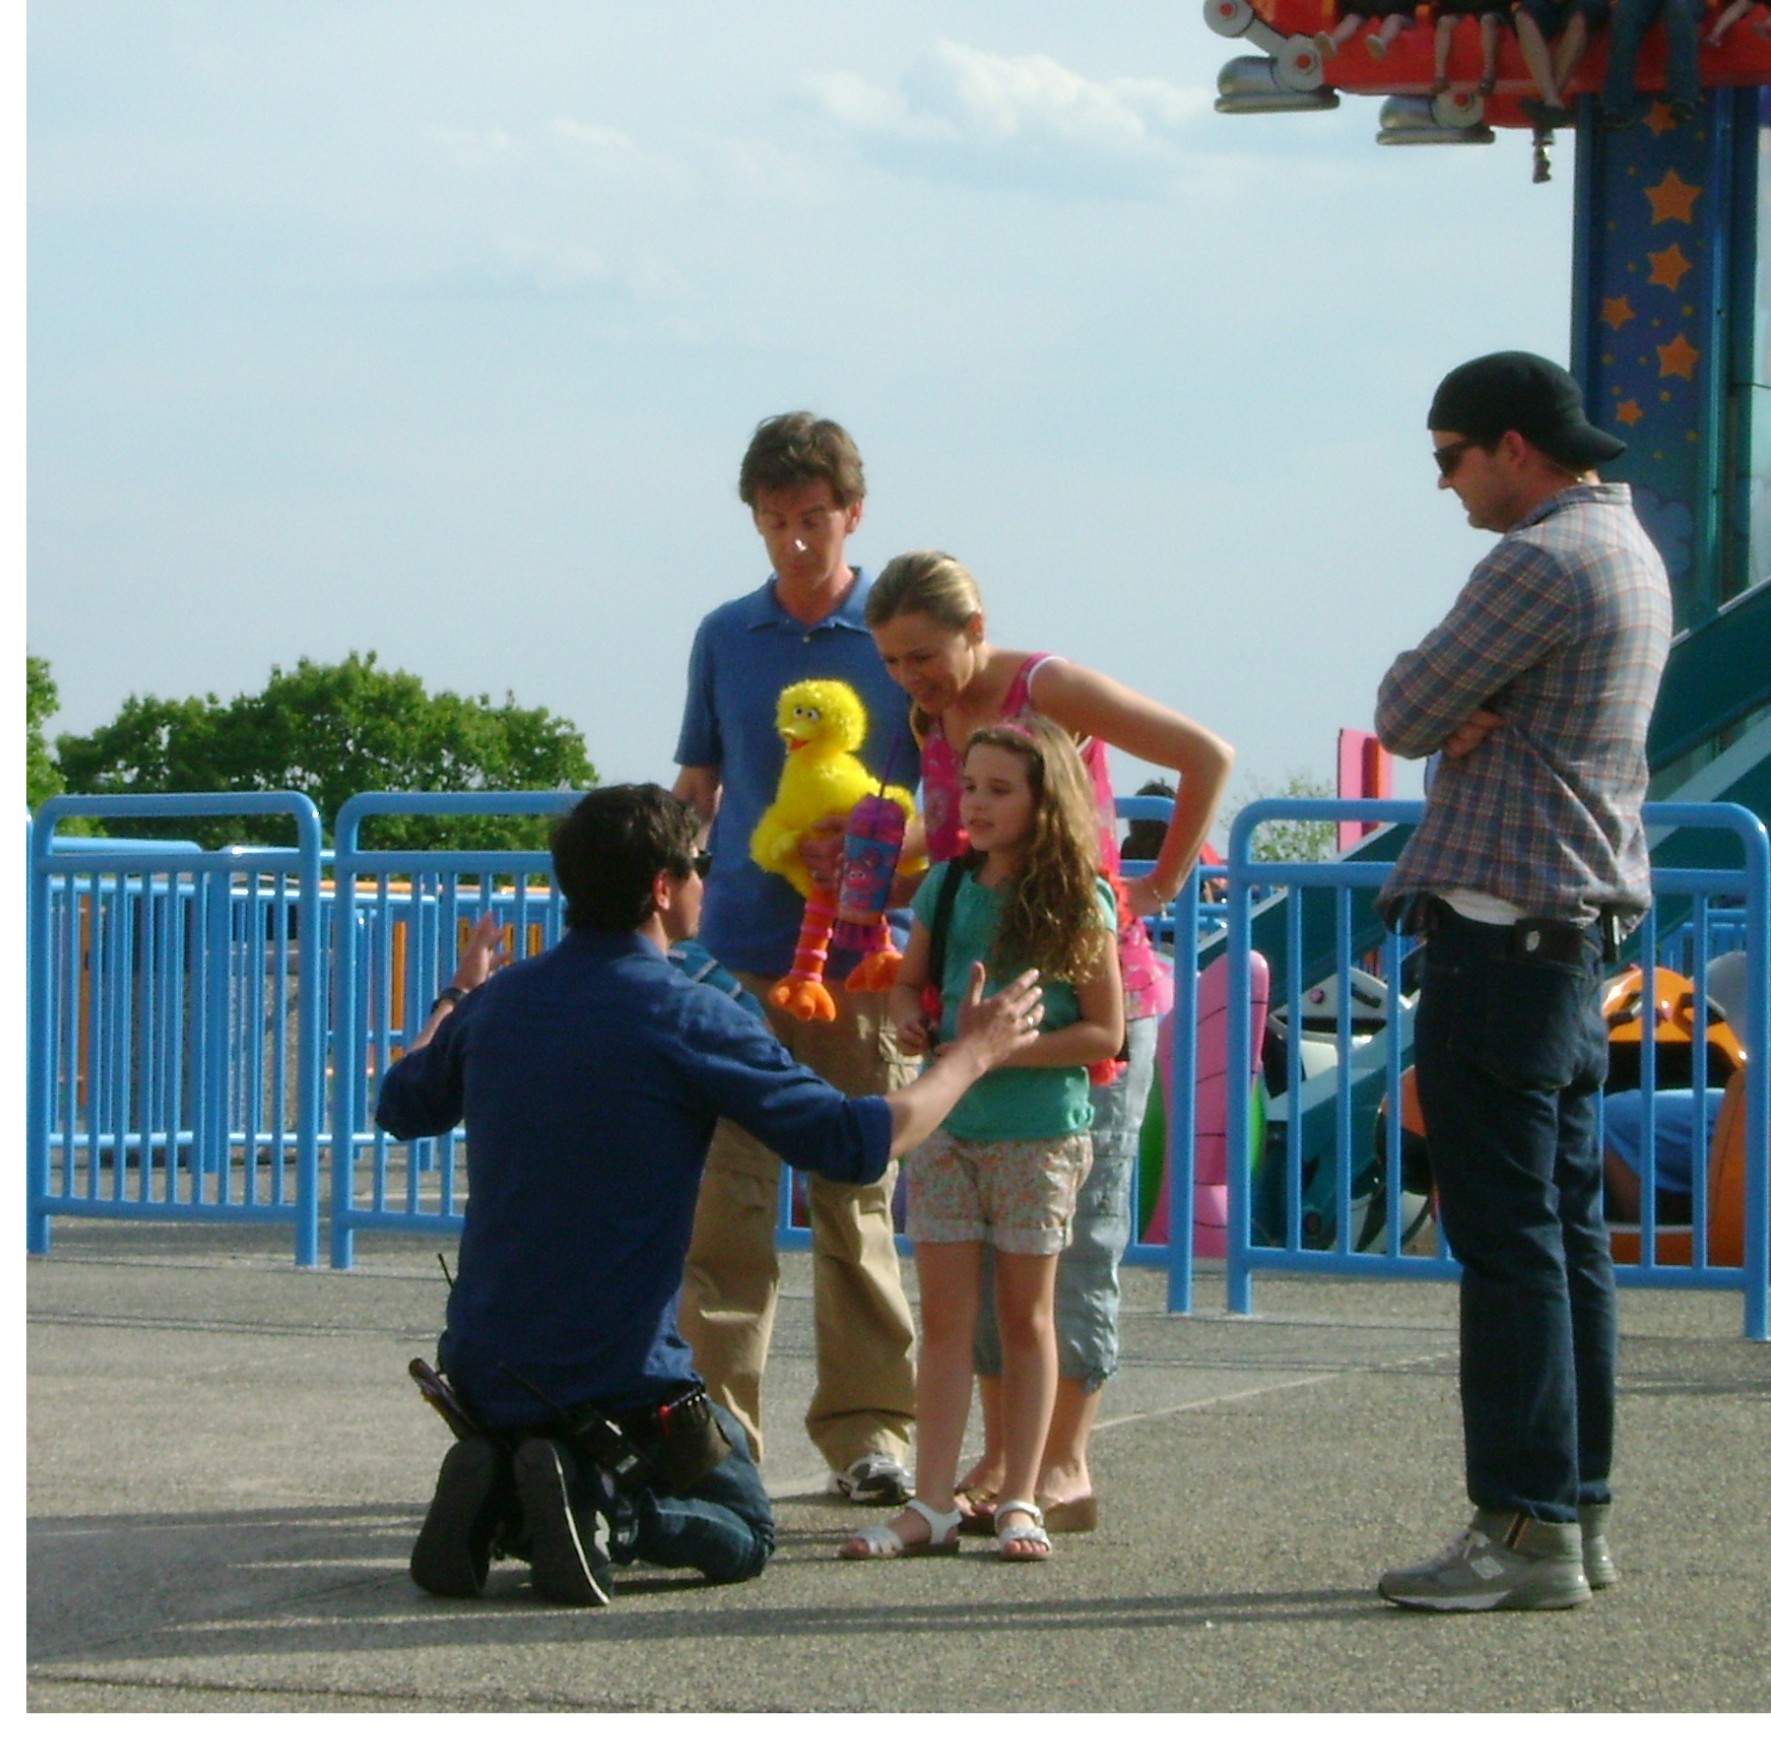 Sesame Place Commercial: Asst Director Arle discussing the park scene with the 'Hero Family' of Joe Matthews, Jodie Shultz, Sean Sheehan and Leila Jean Davis.